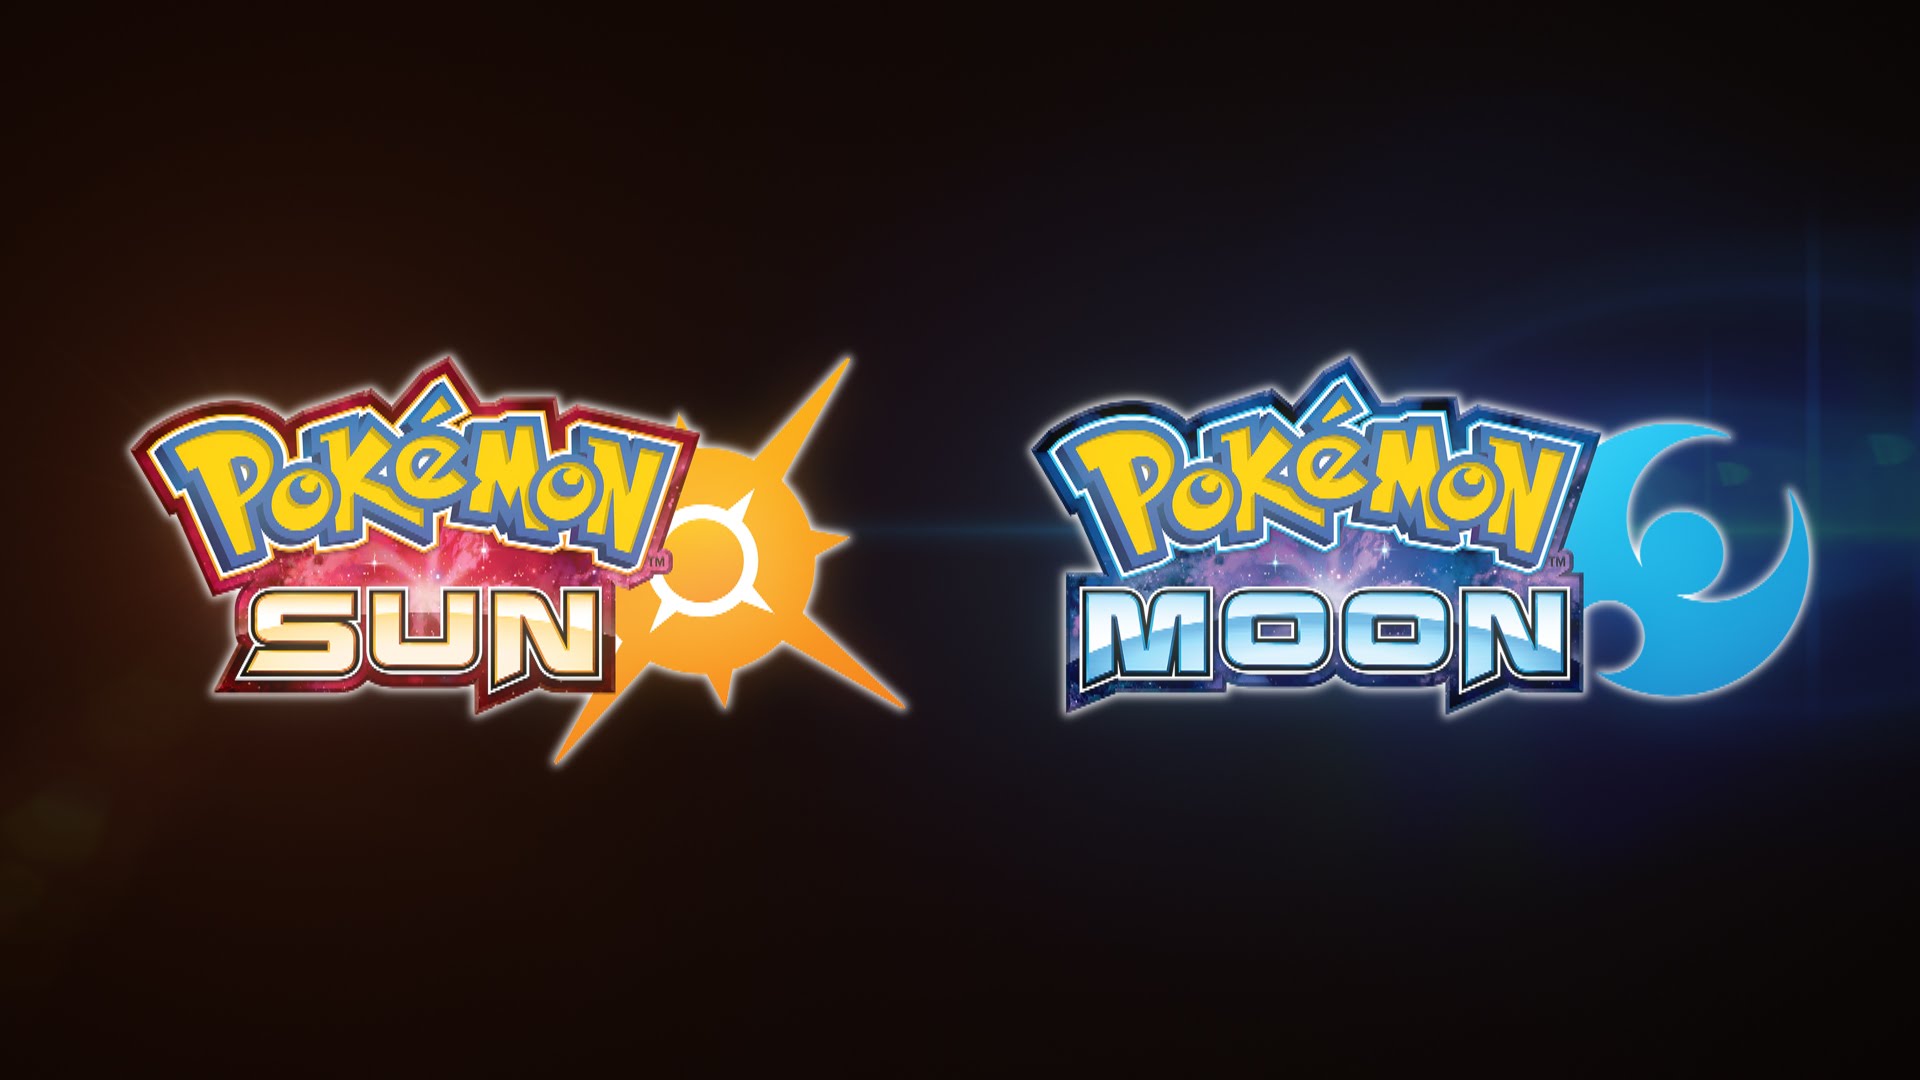 ‘Pokémon Sun’ and ‘Pokémon Moon’ 3 New Characters Revealed! Who’s Your Favorite?